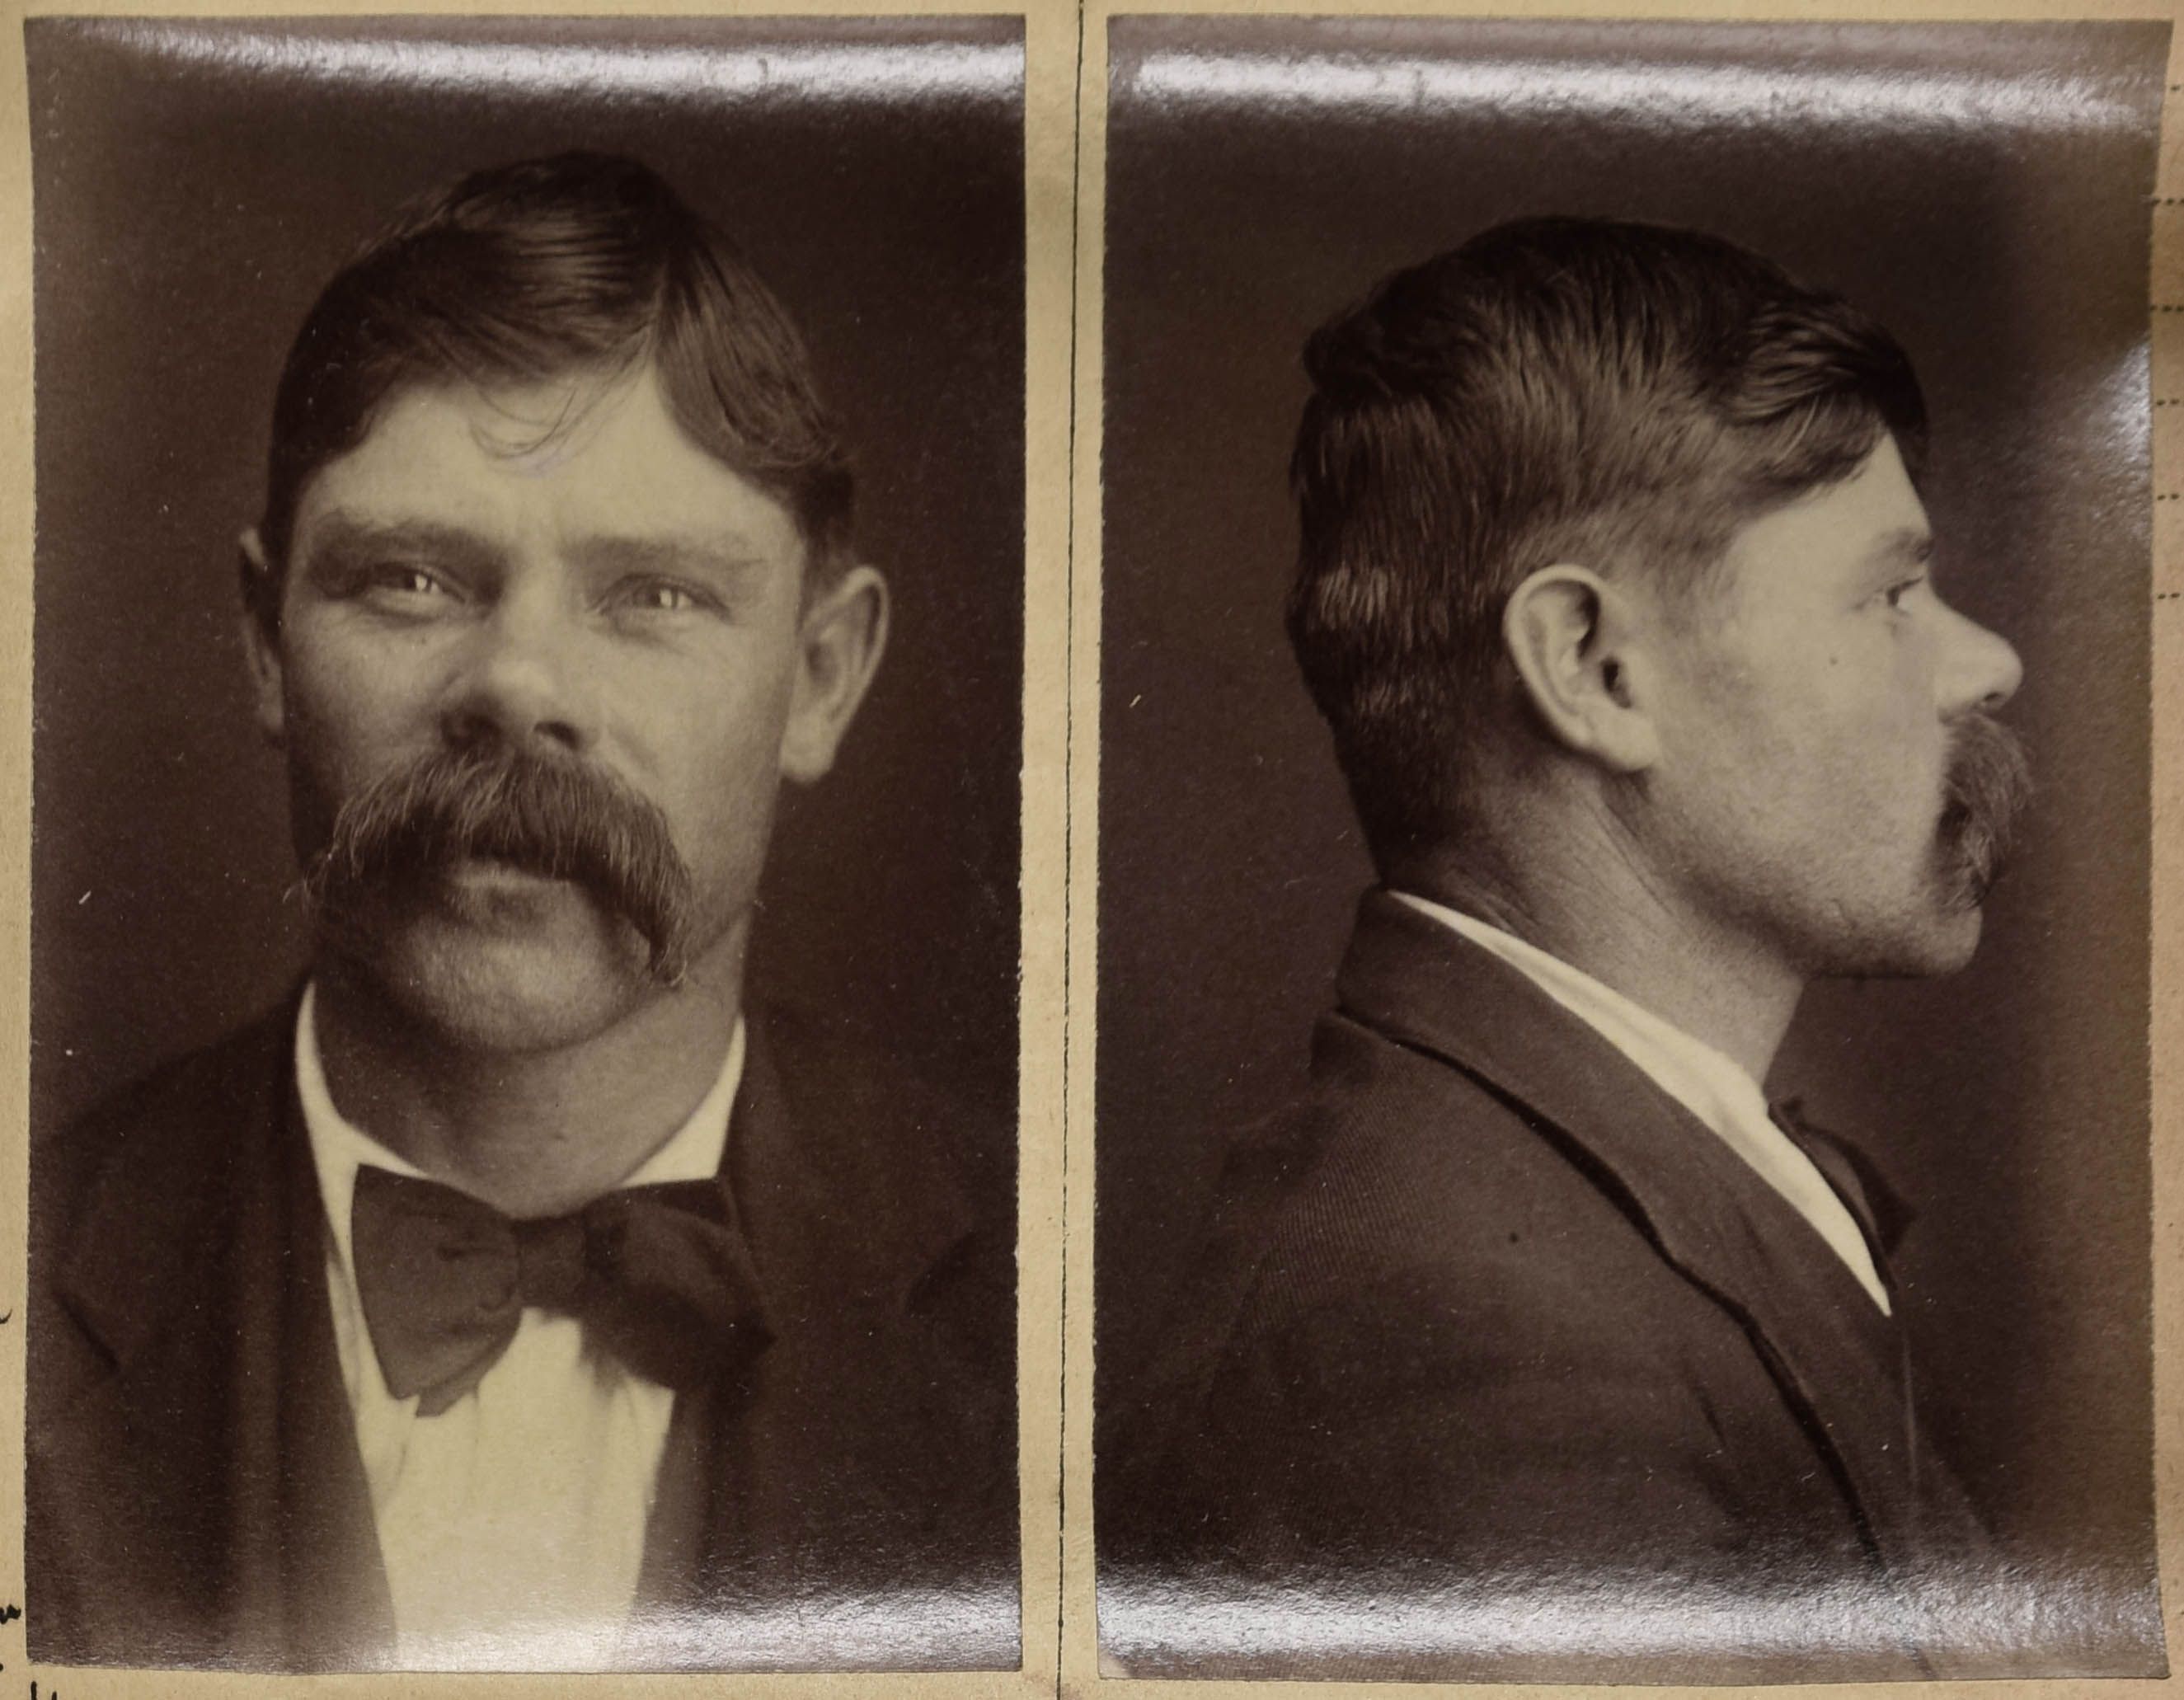 Black and white mugshots - one front-on, one side-on - of a man with a large moustache